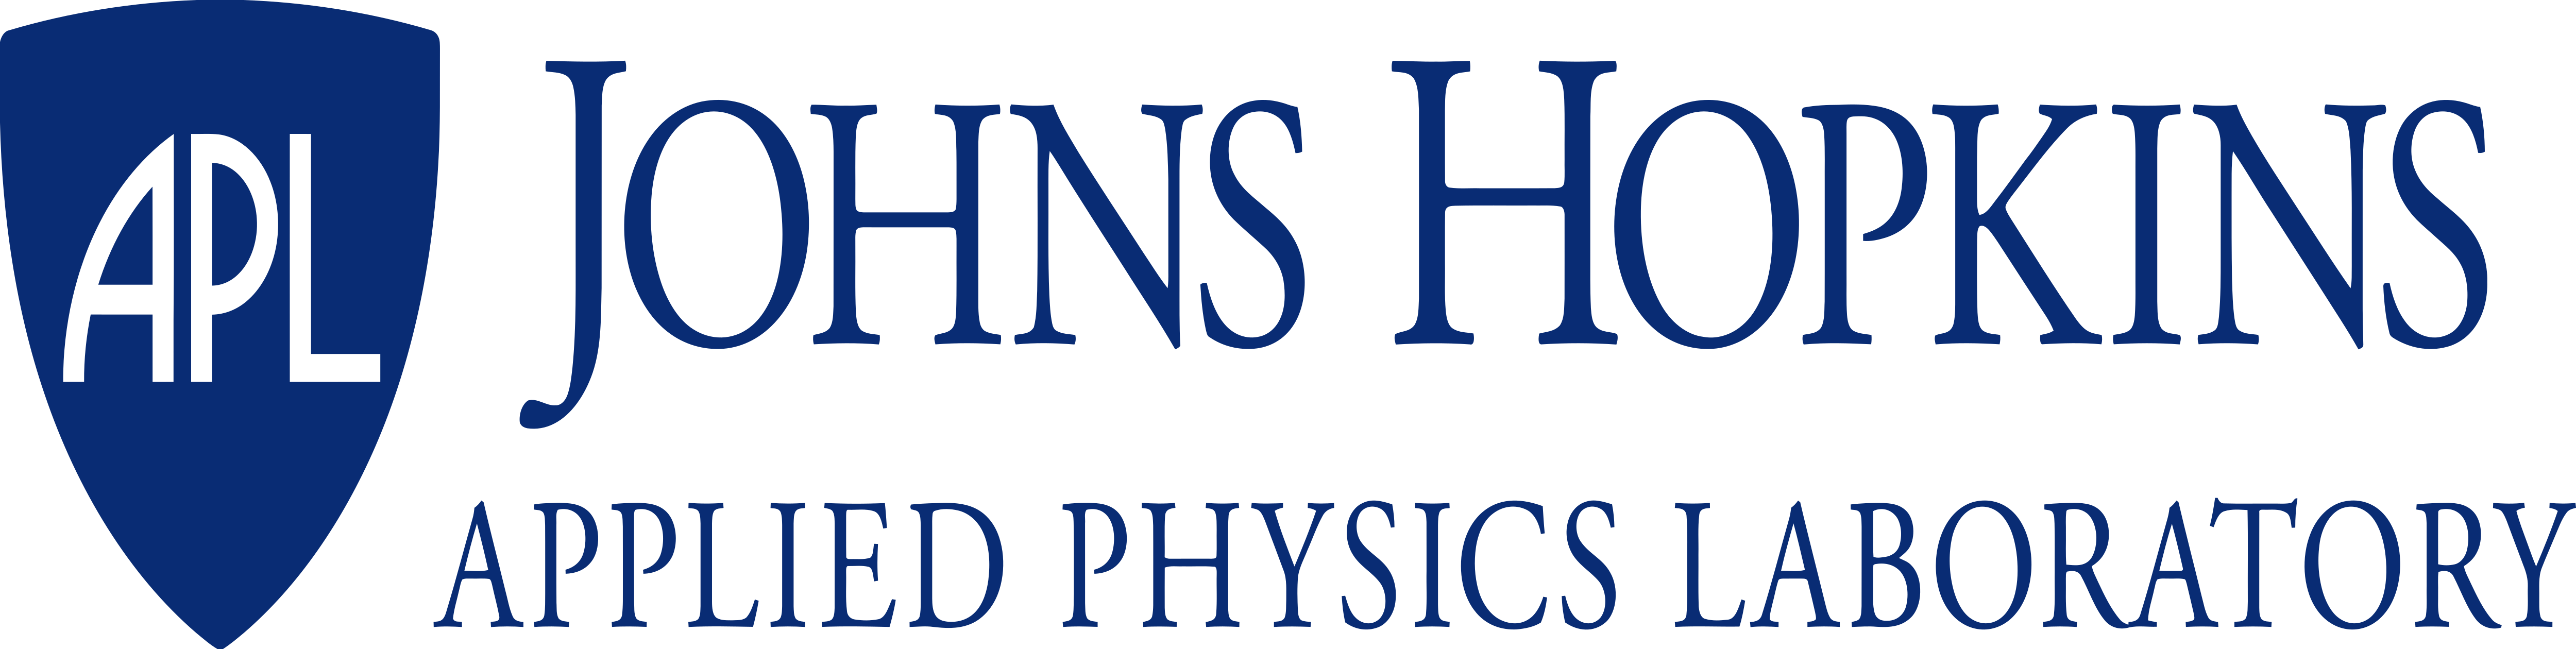 Applied Physics Laboratory Logos Download | Images and Photos finder